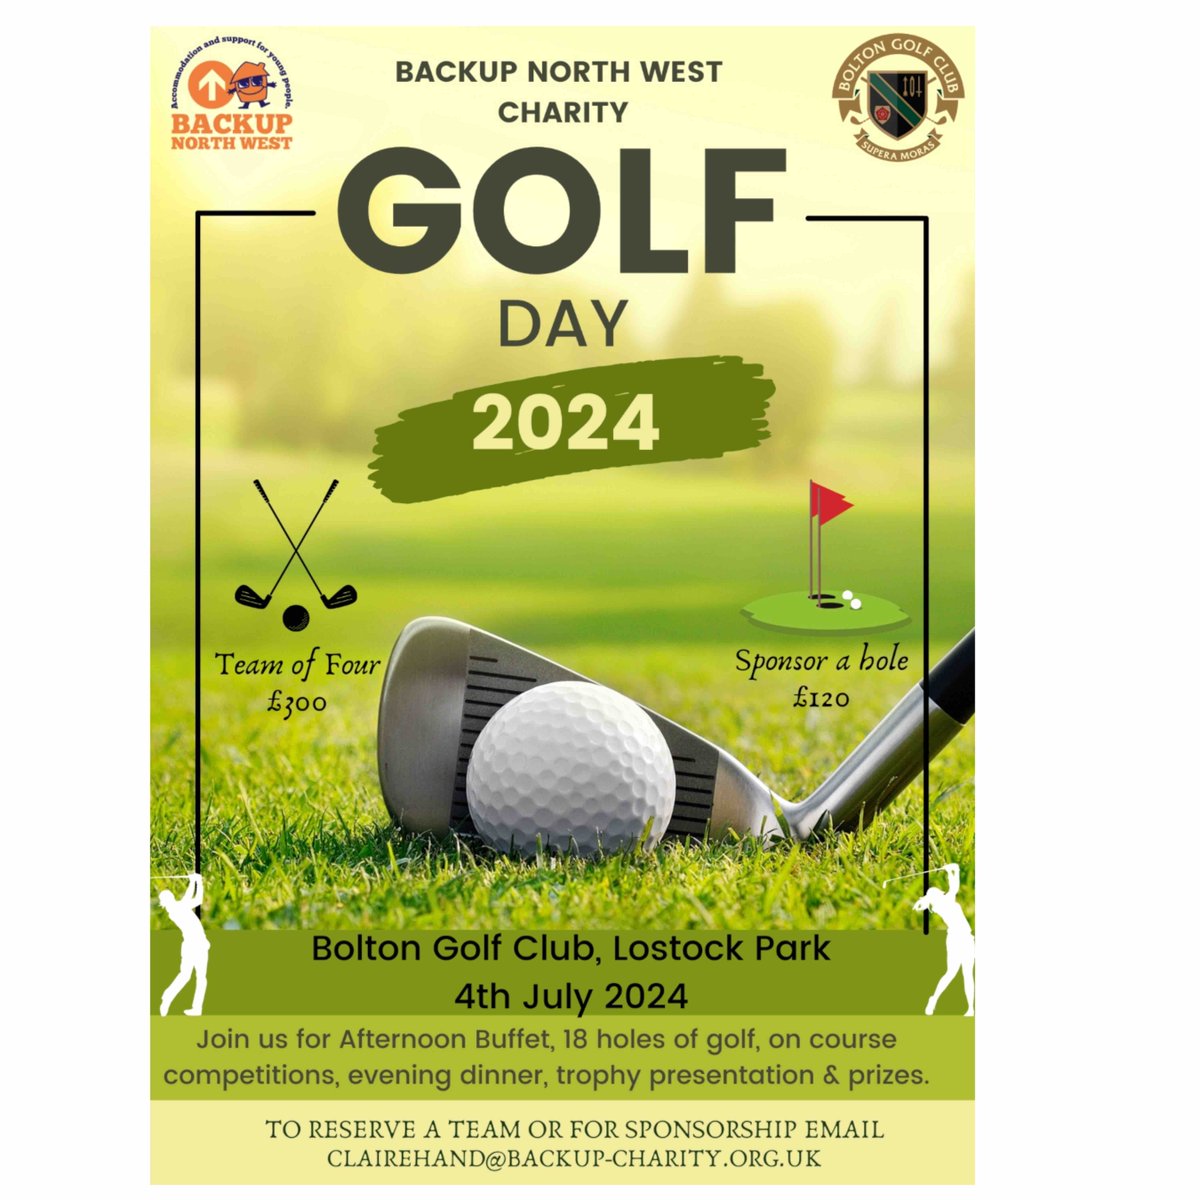 ⛳️ We are back at the Bolton Golf Club on 4th July. Spend the day on the golf course with good friends, family or colleagues. We have a fabulous day planned. To reserve a team or to find out more please email clairehand@backup-charity.org.uk. #Charitygolf